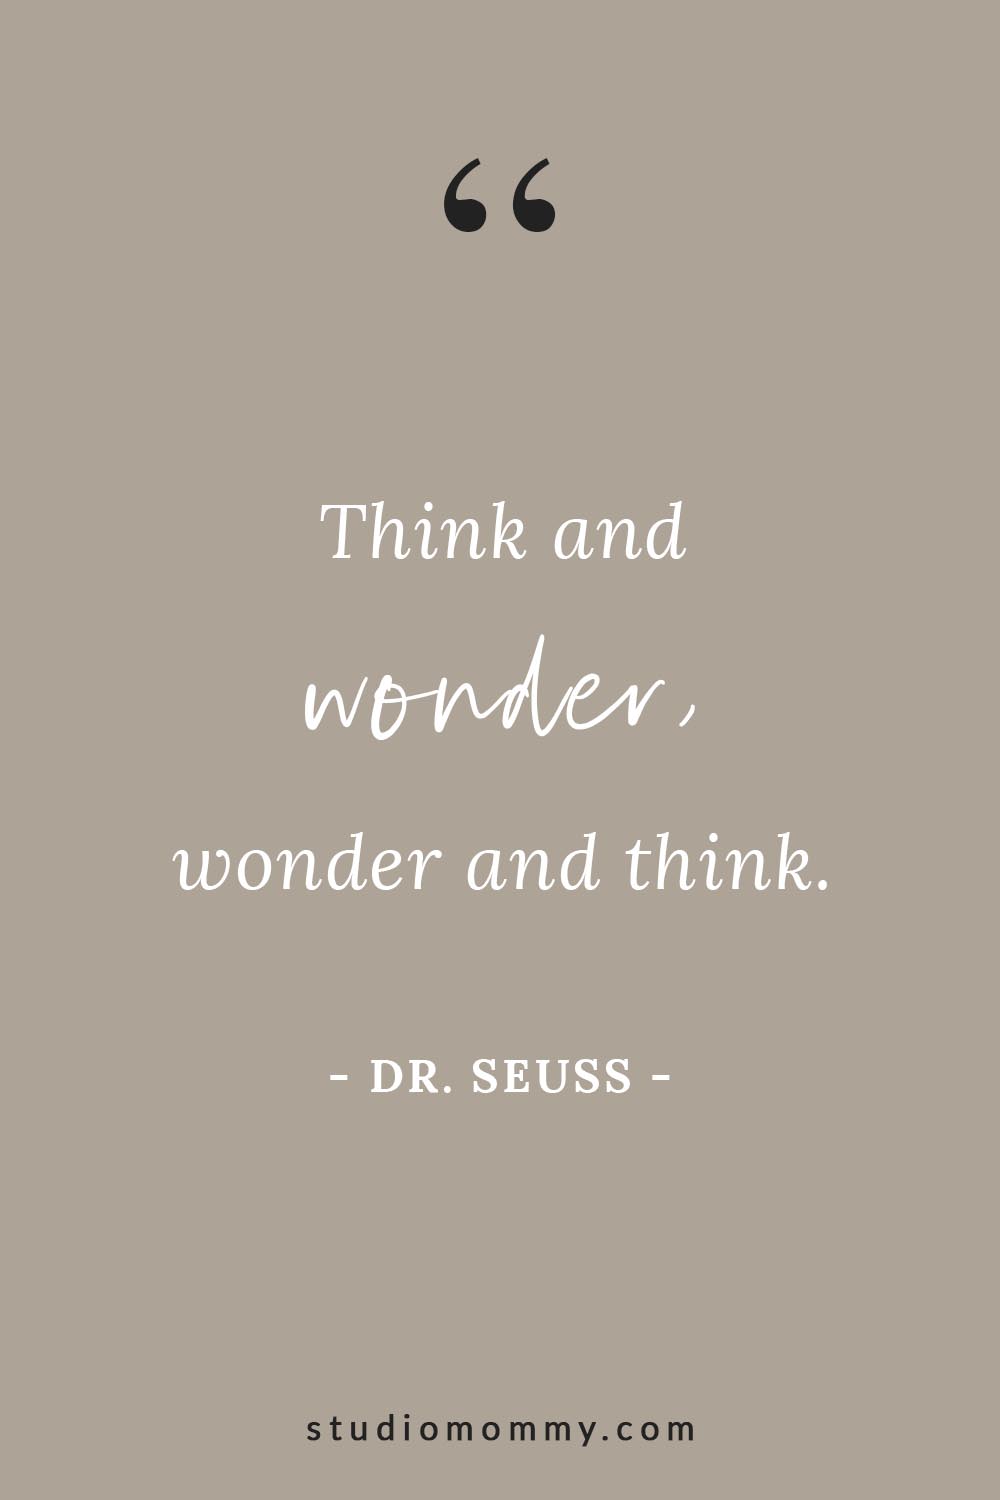 Think and wonder, wonder and think. - Dr. Seuss @studiomommy